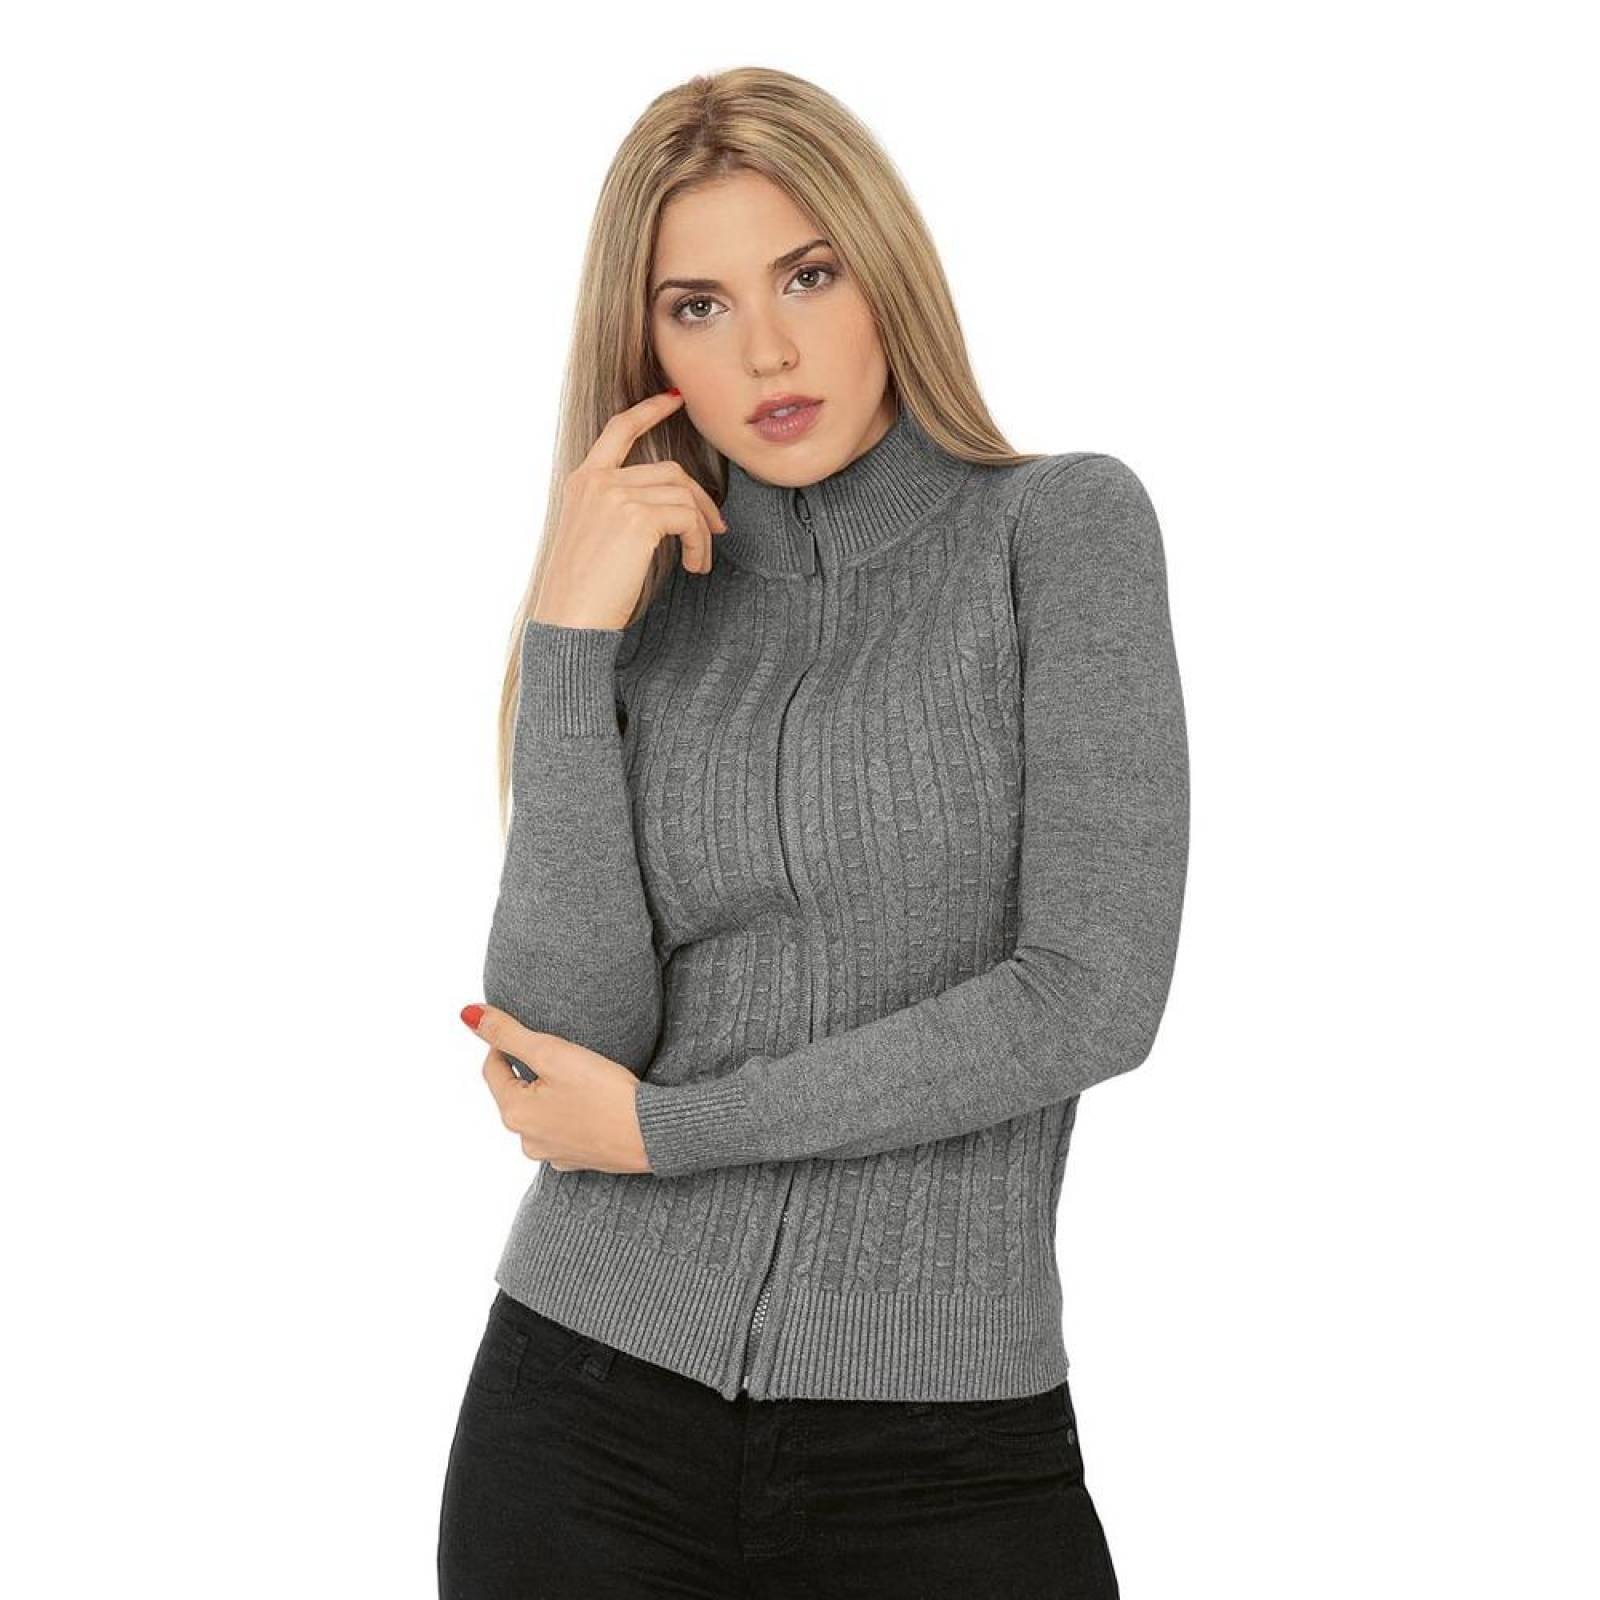 Sweater Capricho Mujer Gris Spandex Cns-132 